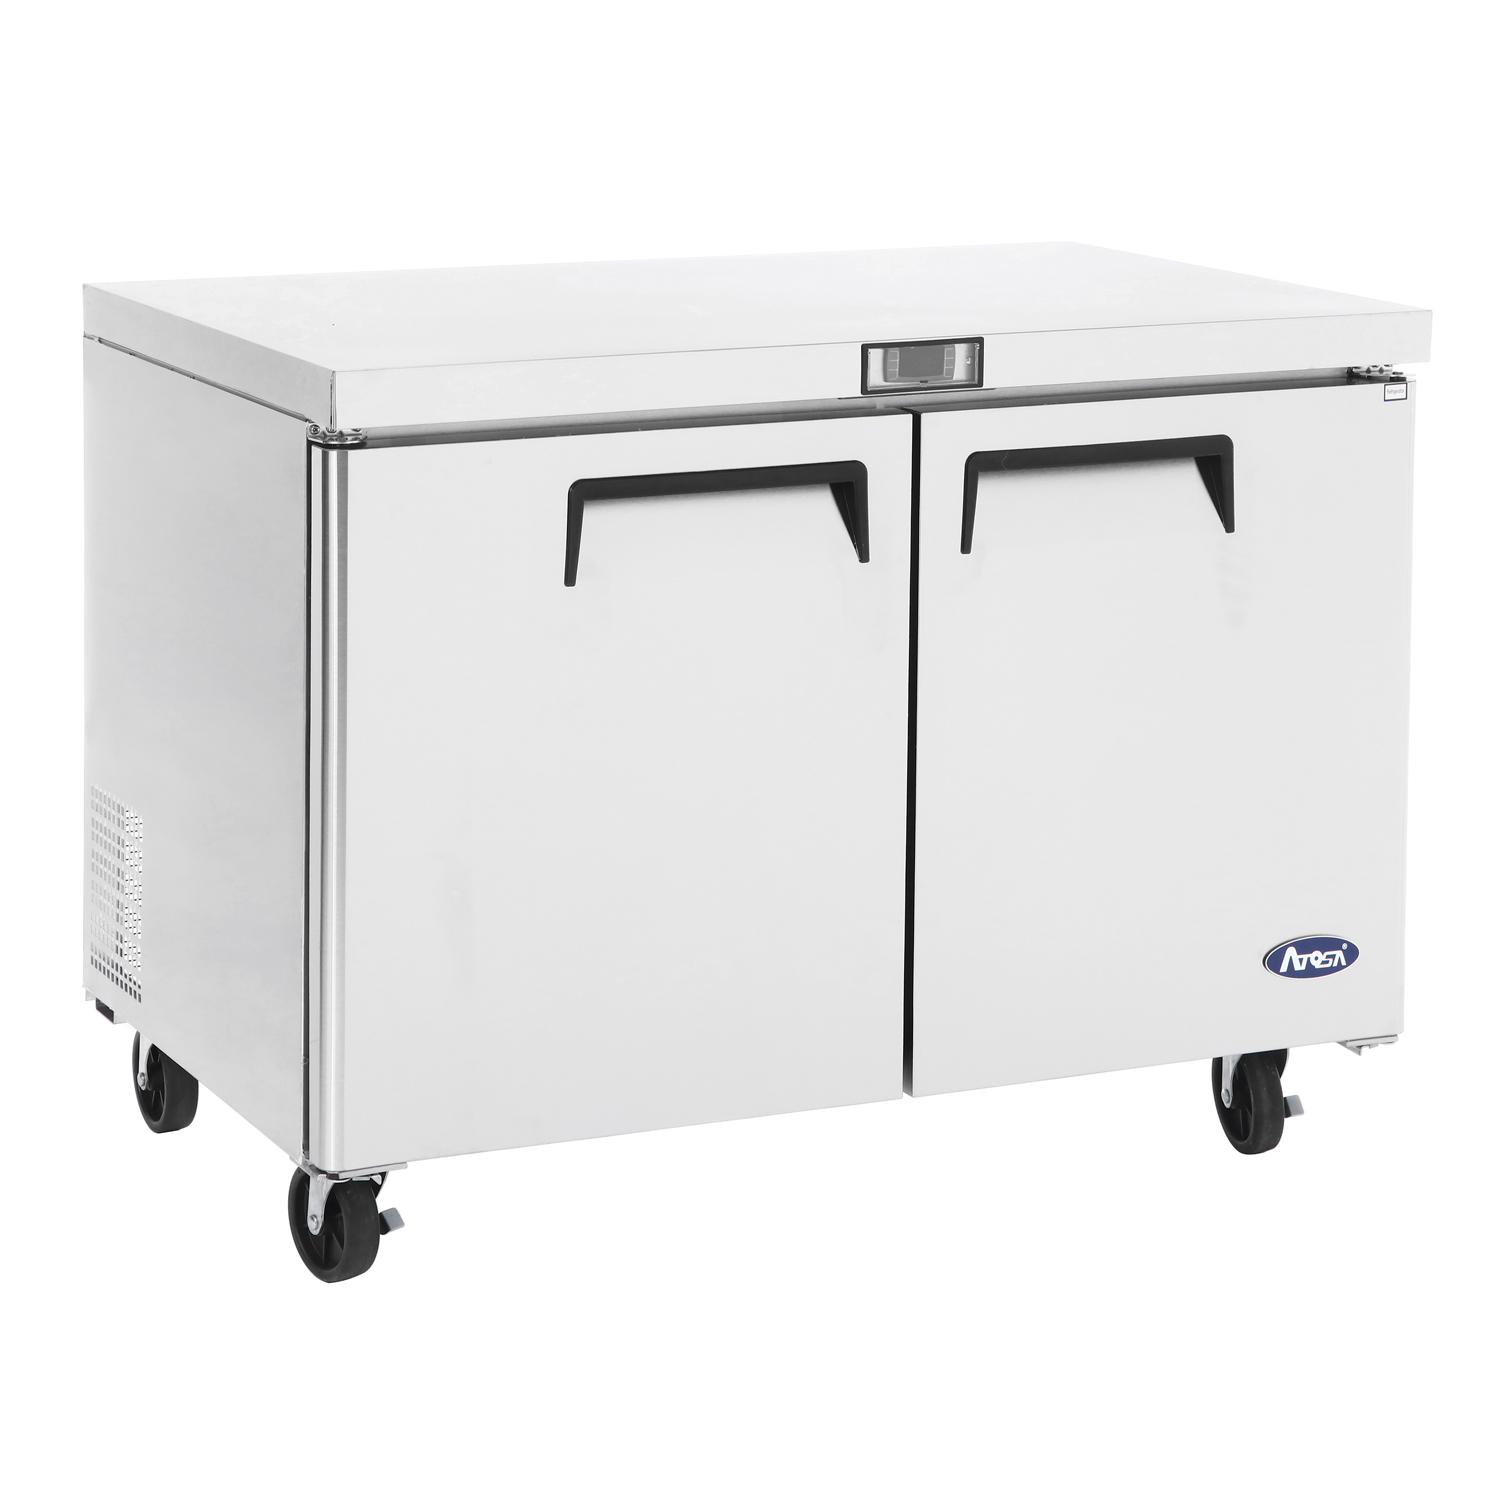 Atosa Two Section Undercounter Reach-In Freezer MGF36FGR, 36-1/8"W, 8.7 cu. ft. image 1